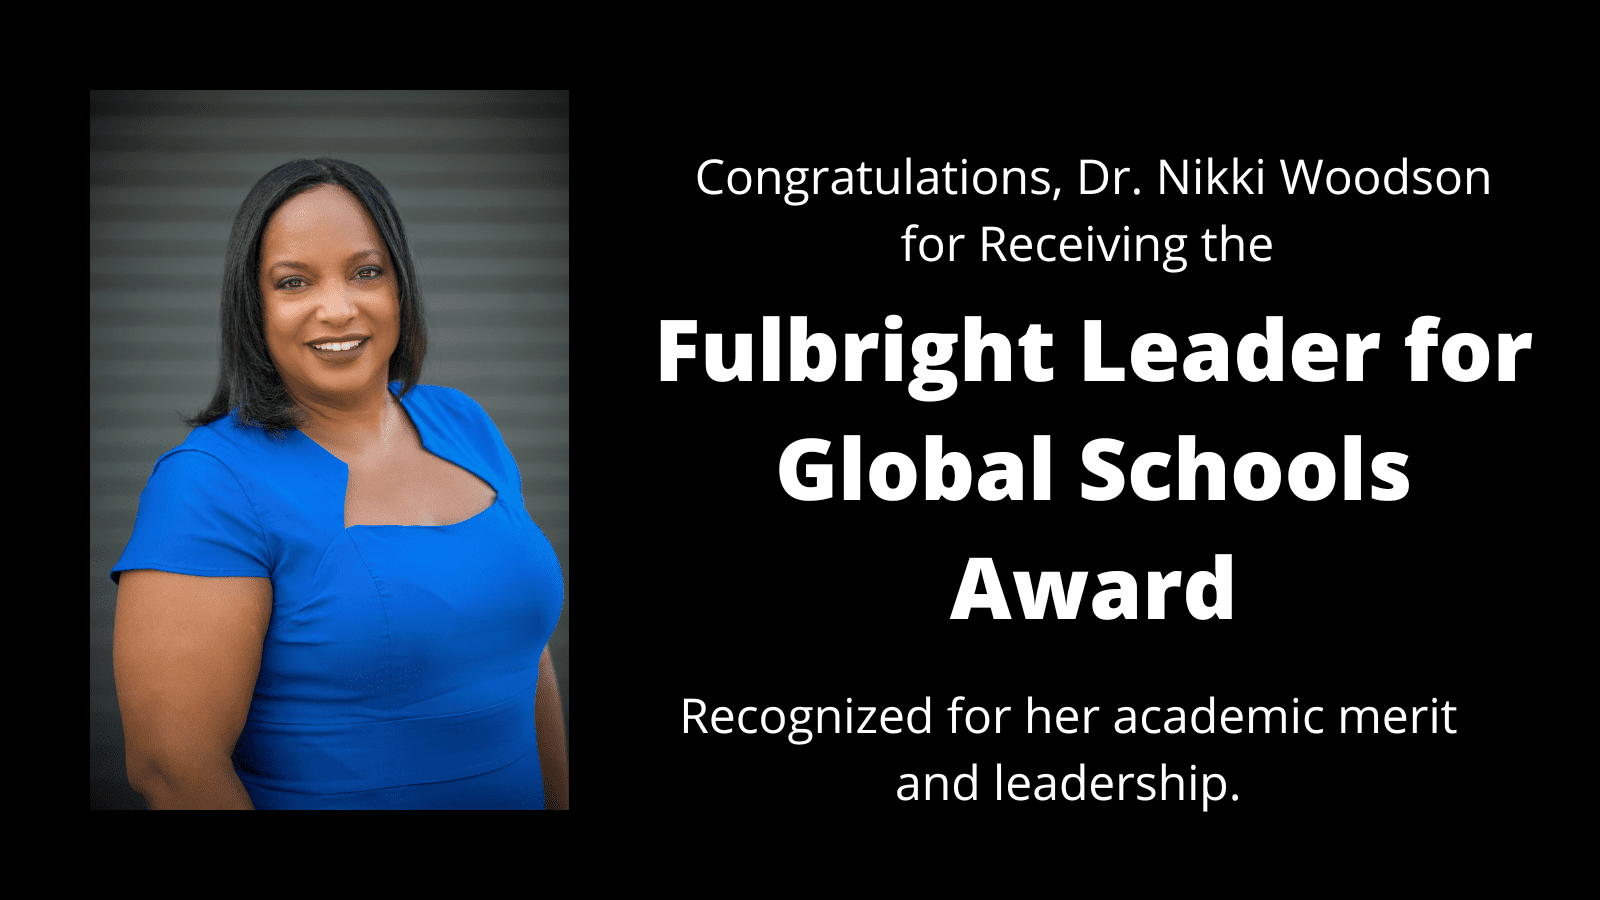 Dr. Woodson Receives Fulbright Award